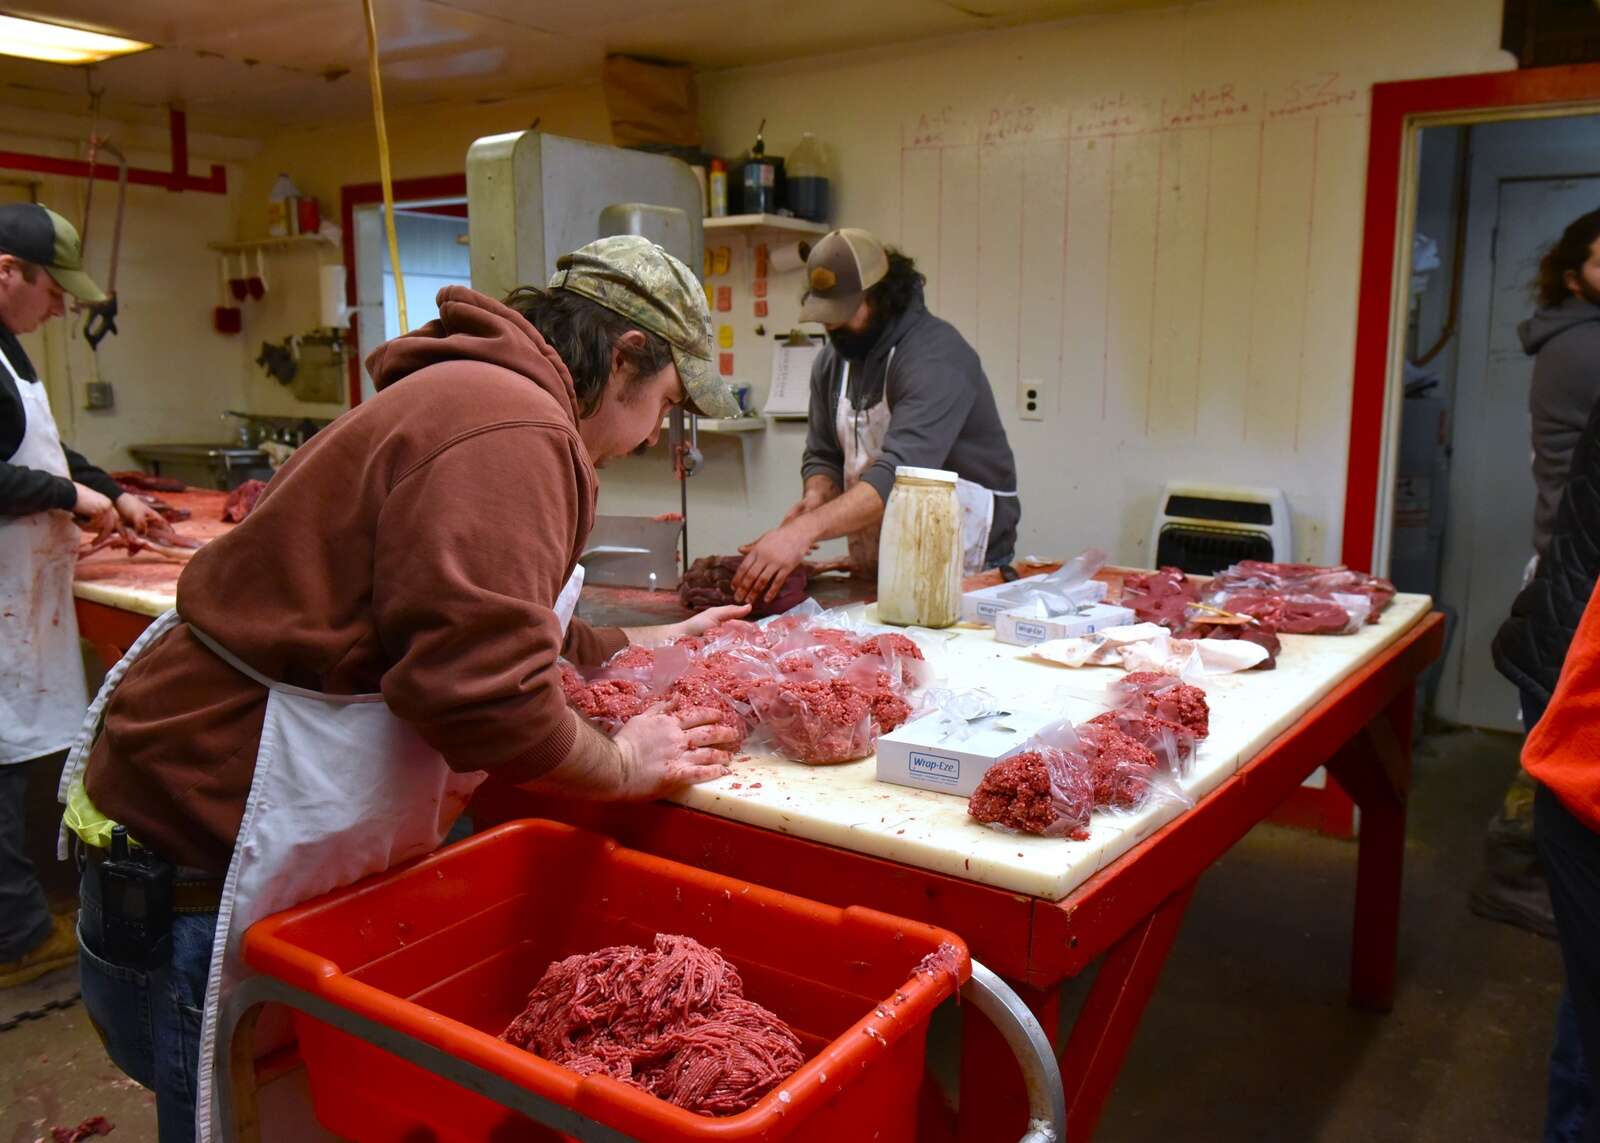 James Barnes gets venison ready for packaging at Bims Boloney